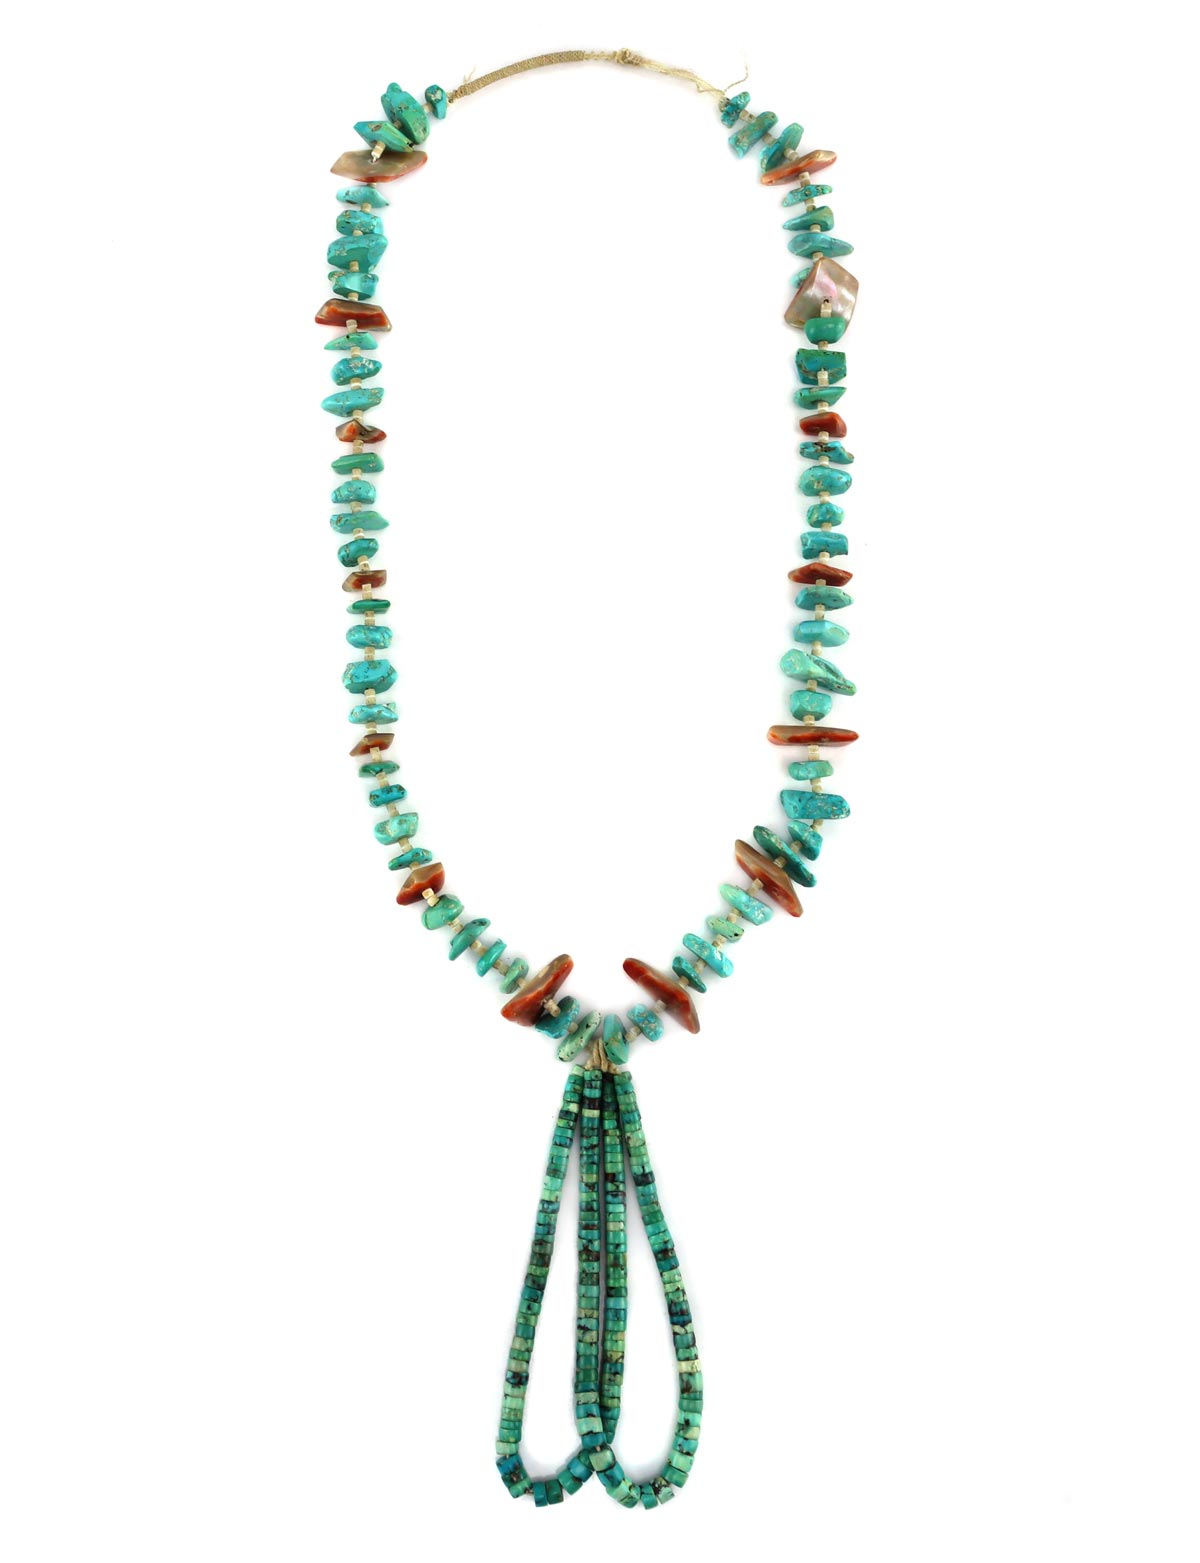 Navajo - Turquoise Nugget, Spiny Oyster, and Clamshell Heishi Necklace with Pair of Jocla Pendants c. 1940-50s, 26" length